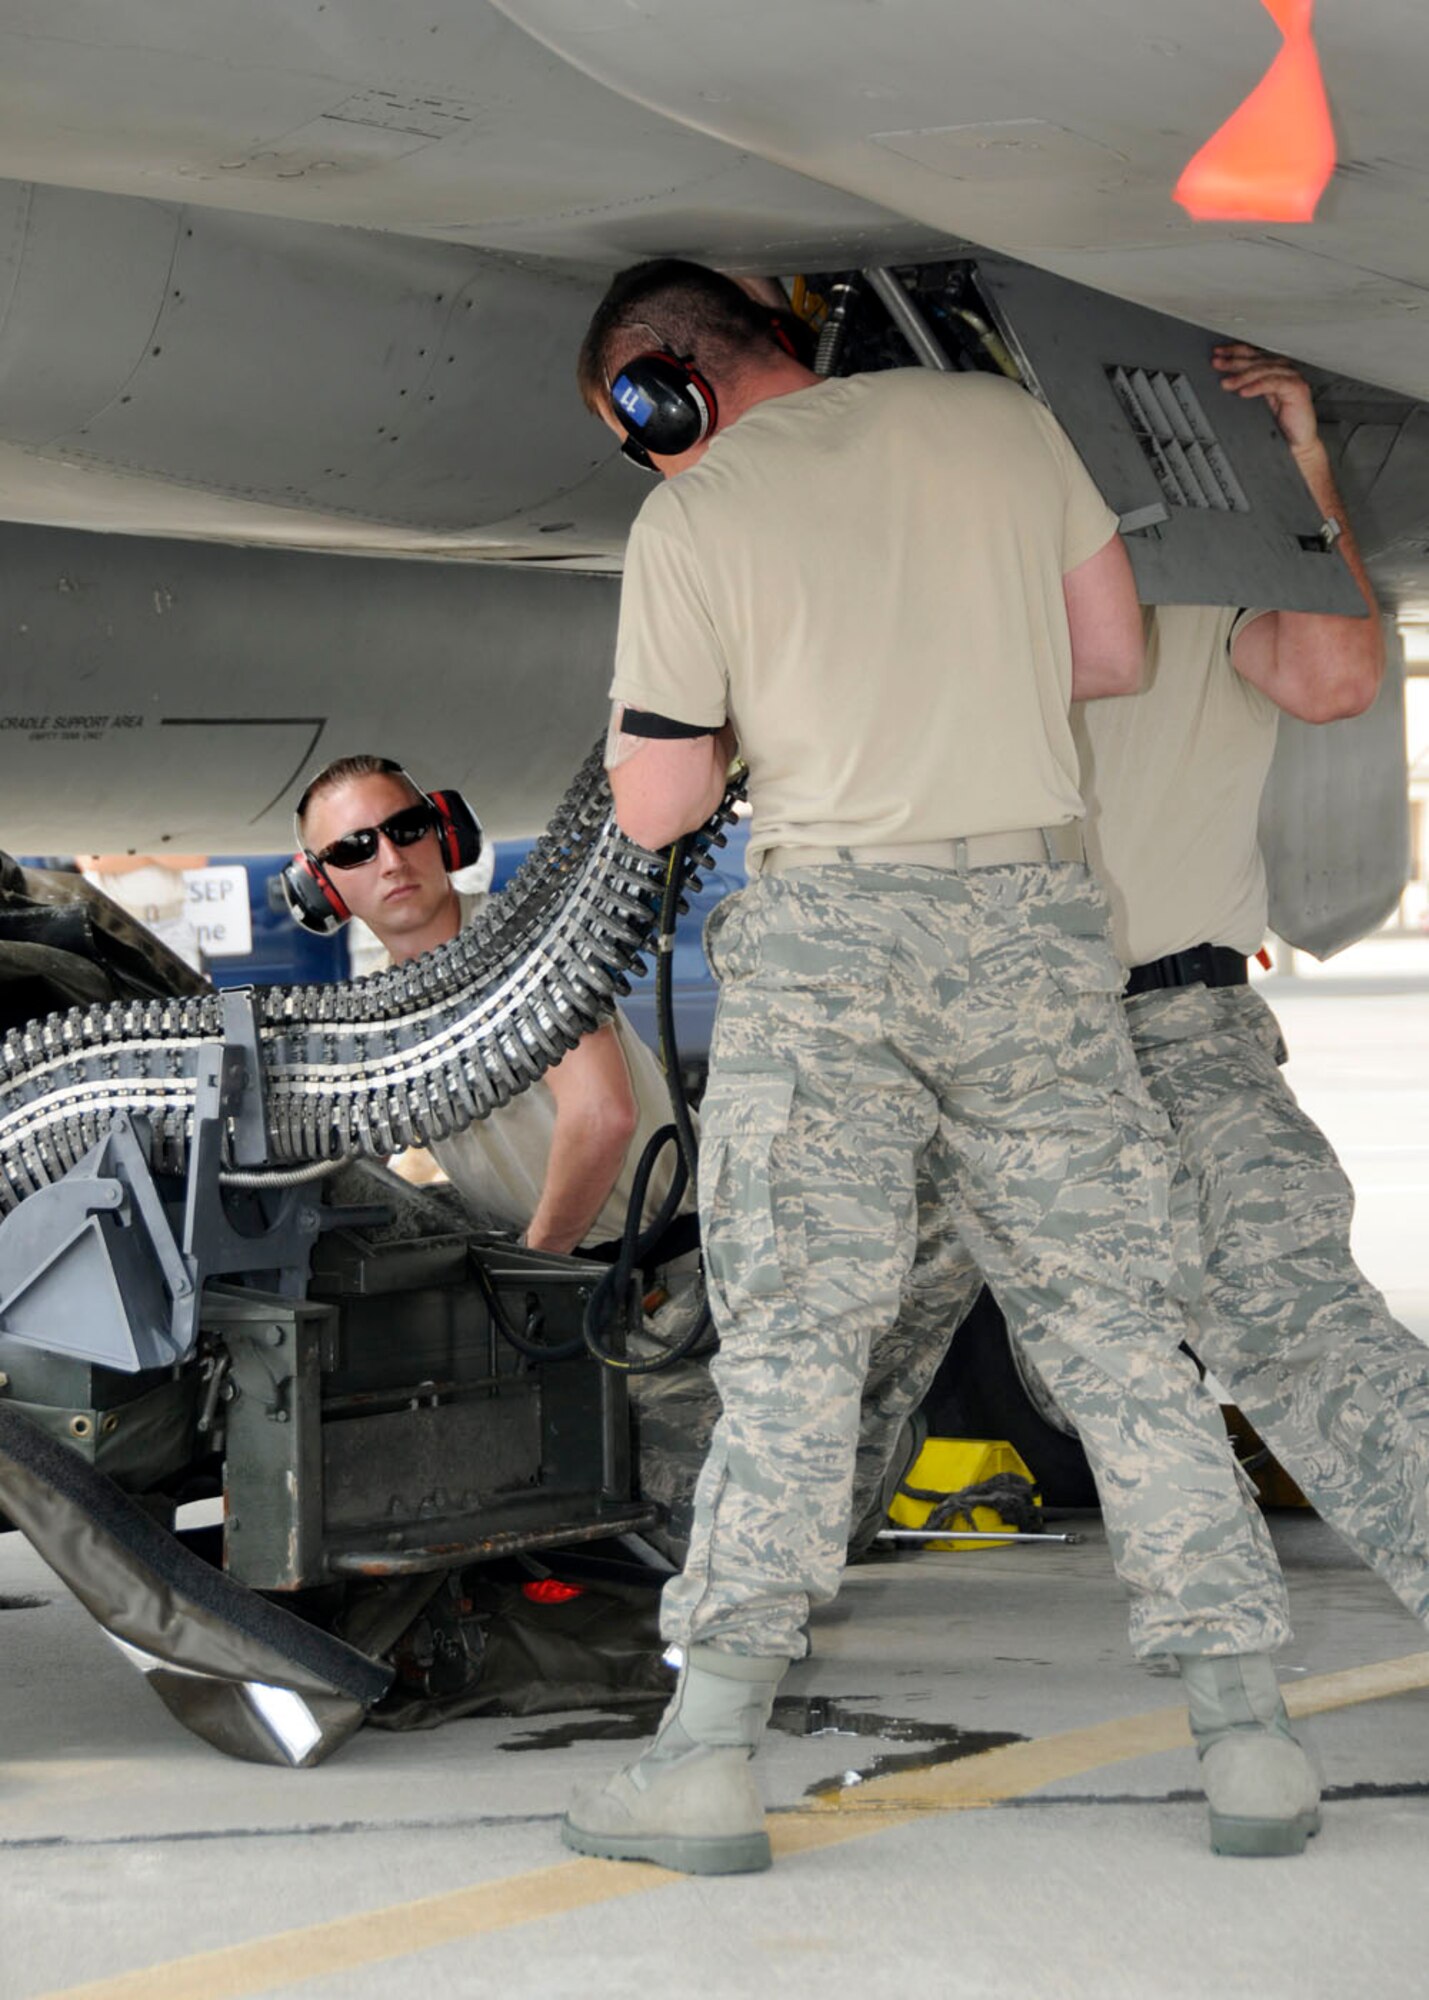 Technical Sgt. Terrance Brown, Technical Sgt. Scott Gemelli, and Staff Sgt. Ryan Quigley from the 104th Fighter Wing, Massachusetts Air National Guard unload rounds for the first time from the F-15 at Tyndall AFB, Florida as they participate in the Weapons System Evaluation Program (WSEP), known as Combat Archer, on April 19, 2011. This training is important for the ground crews to test their maintenance systems and processes while loading live munitions on the F-15 eagle, as well as critical live war fighting training for the F-15 pilots to employ air-to-air missiles against real world targets.  (U.S.A.F. photograph by Senior Master Sgt. Robert J. Sabonis)